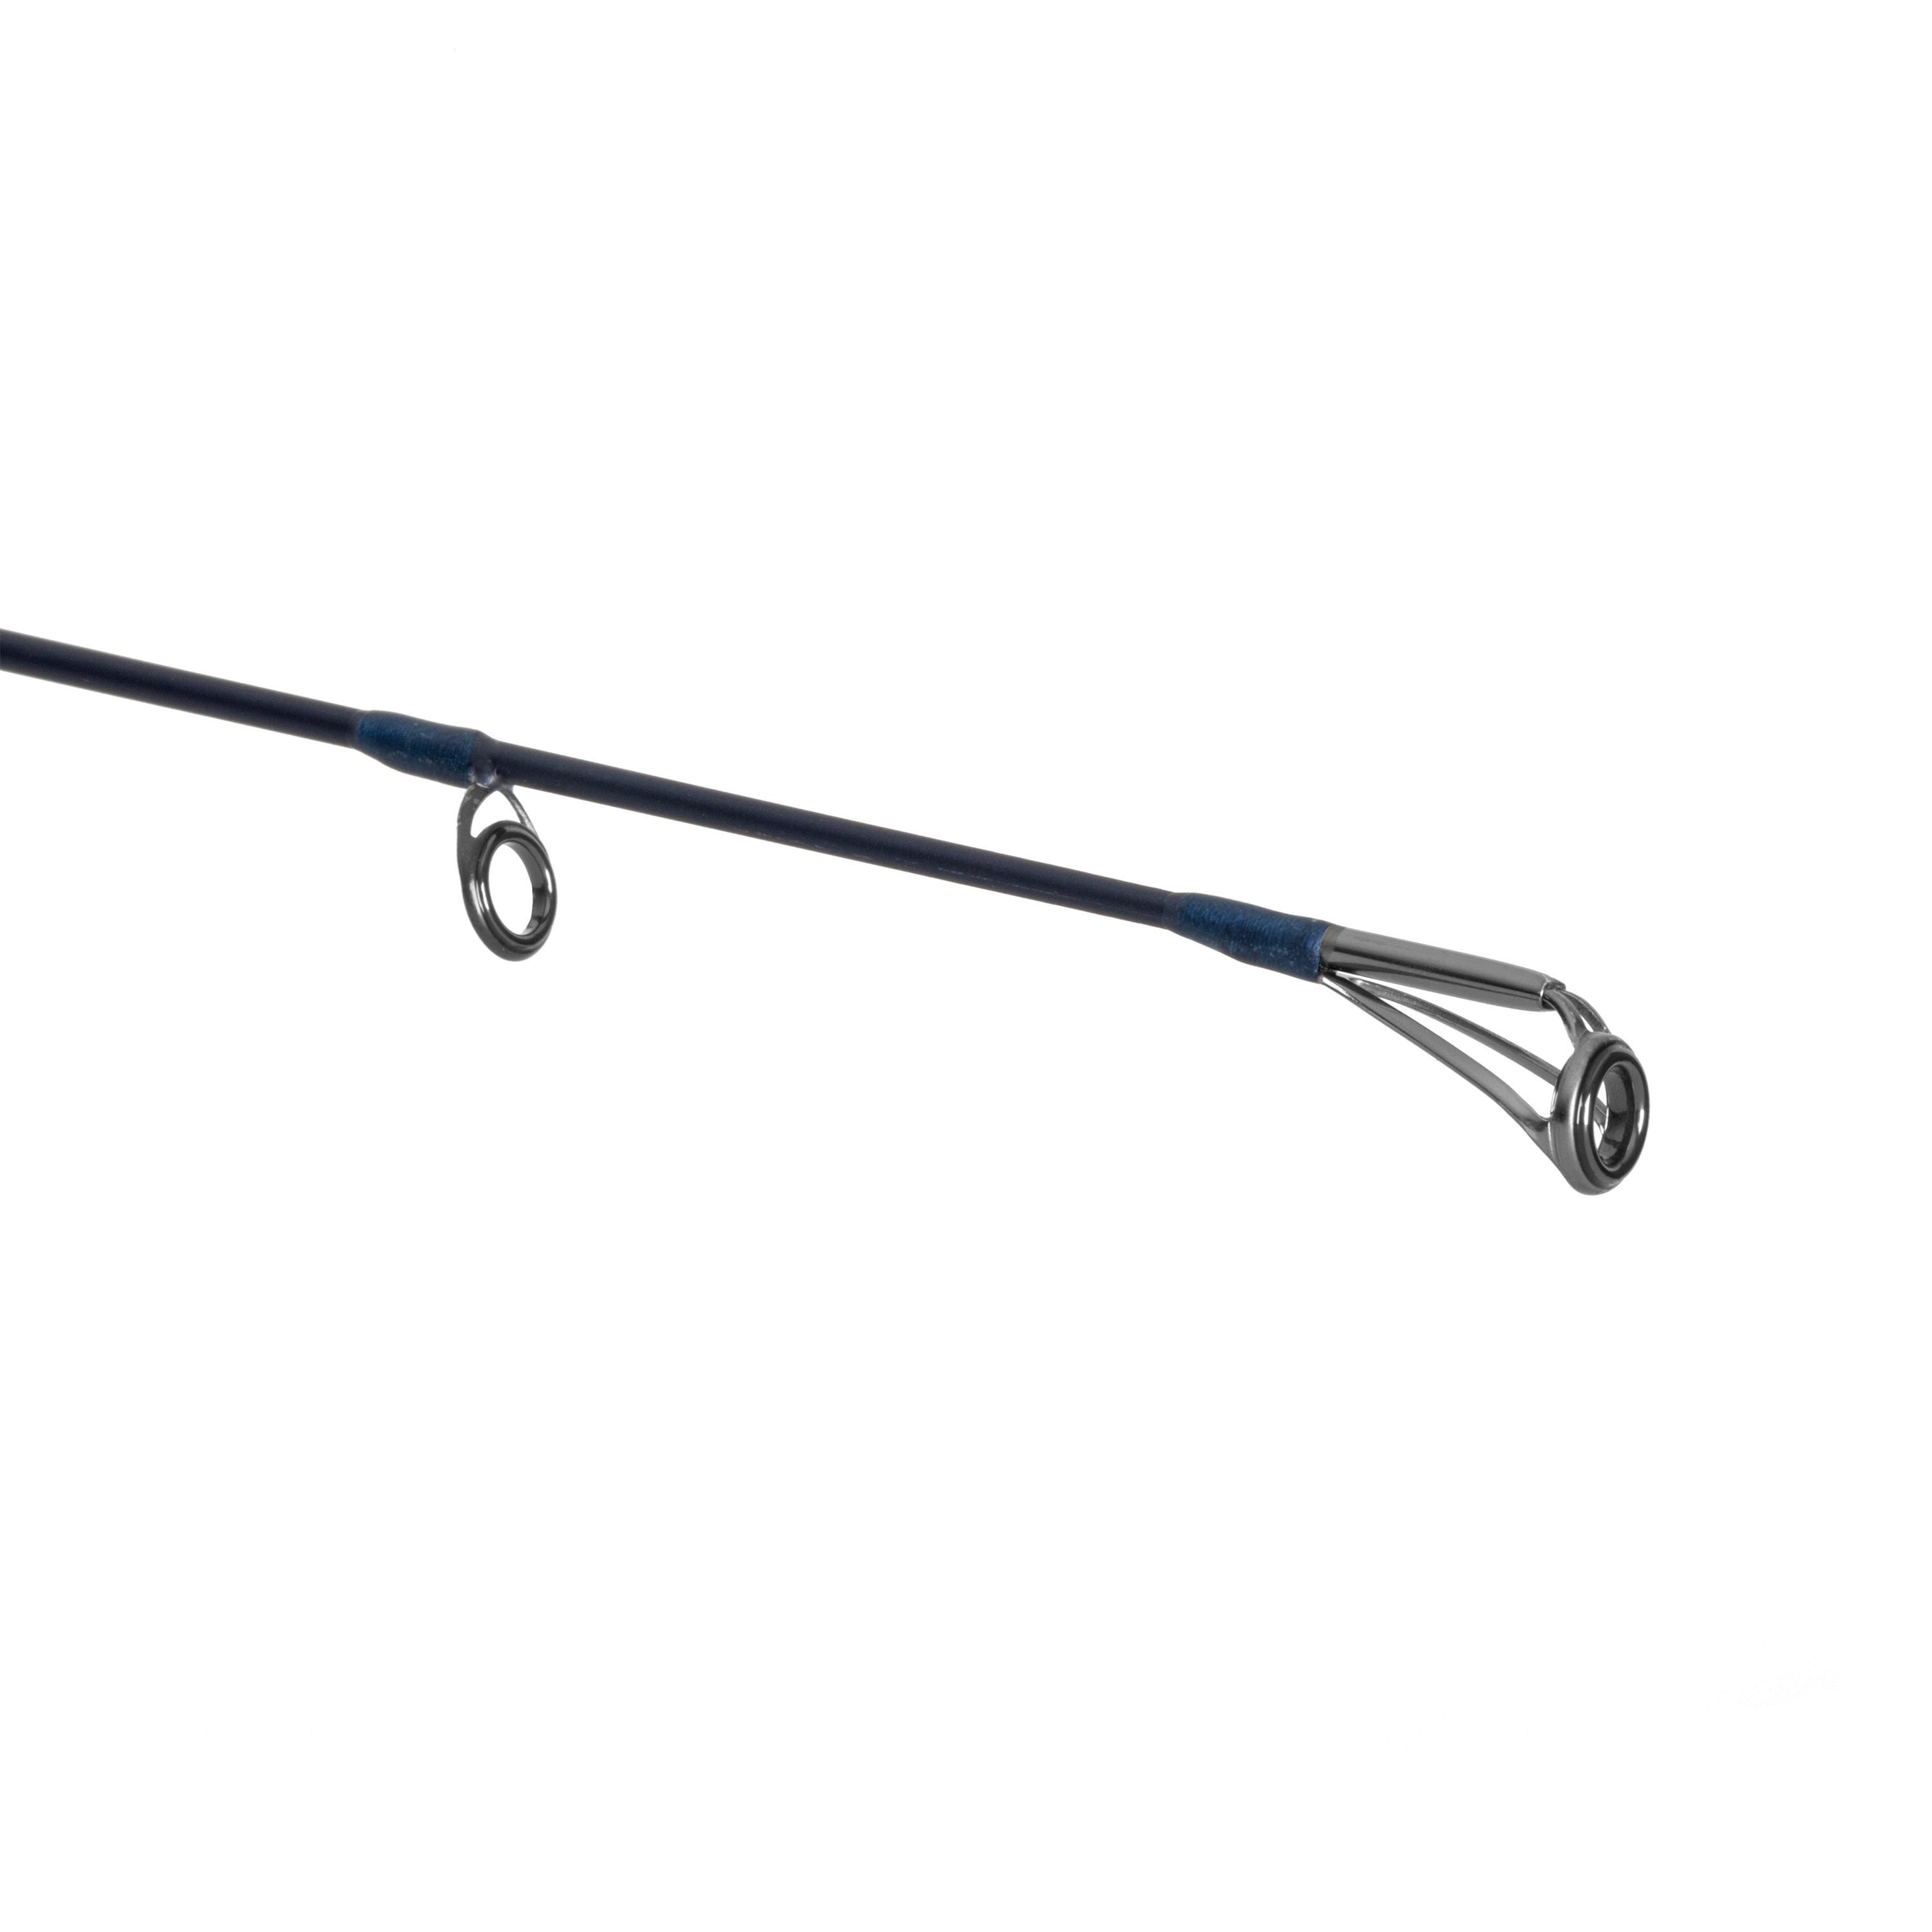 Elevate saltwater performance with the new GCX Inshore